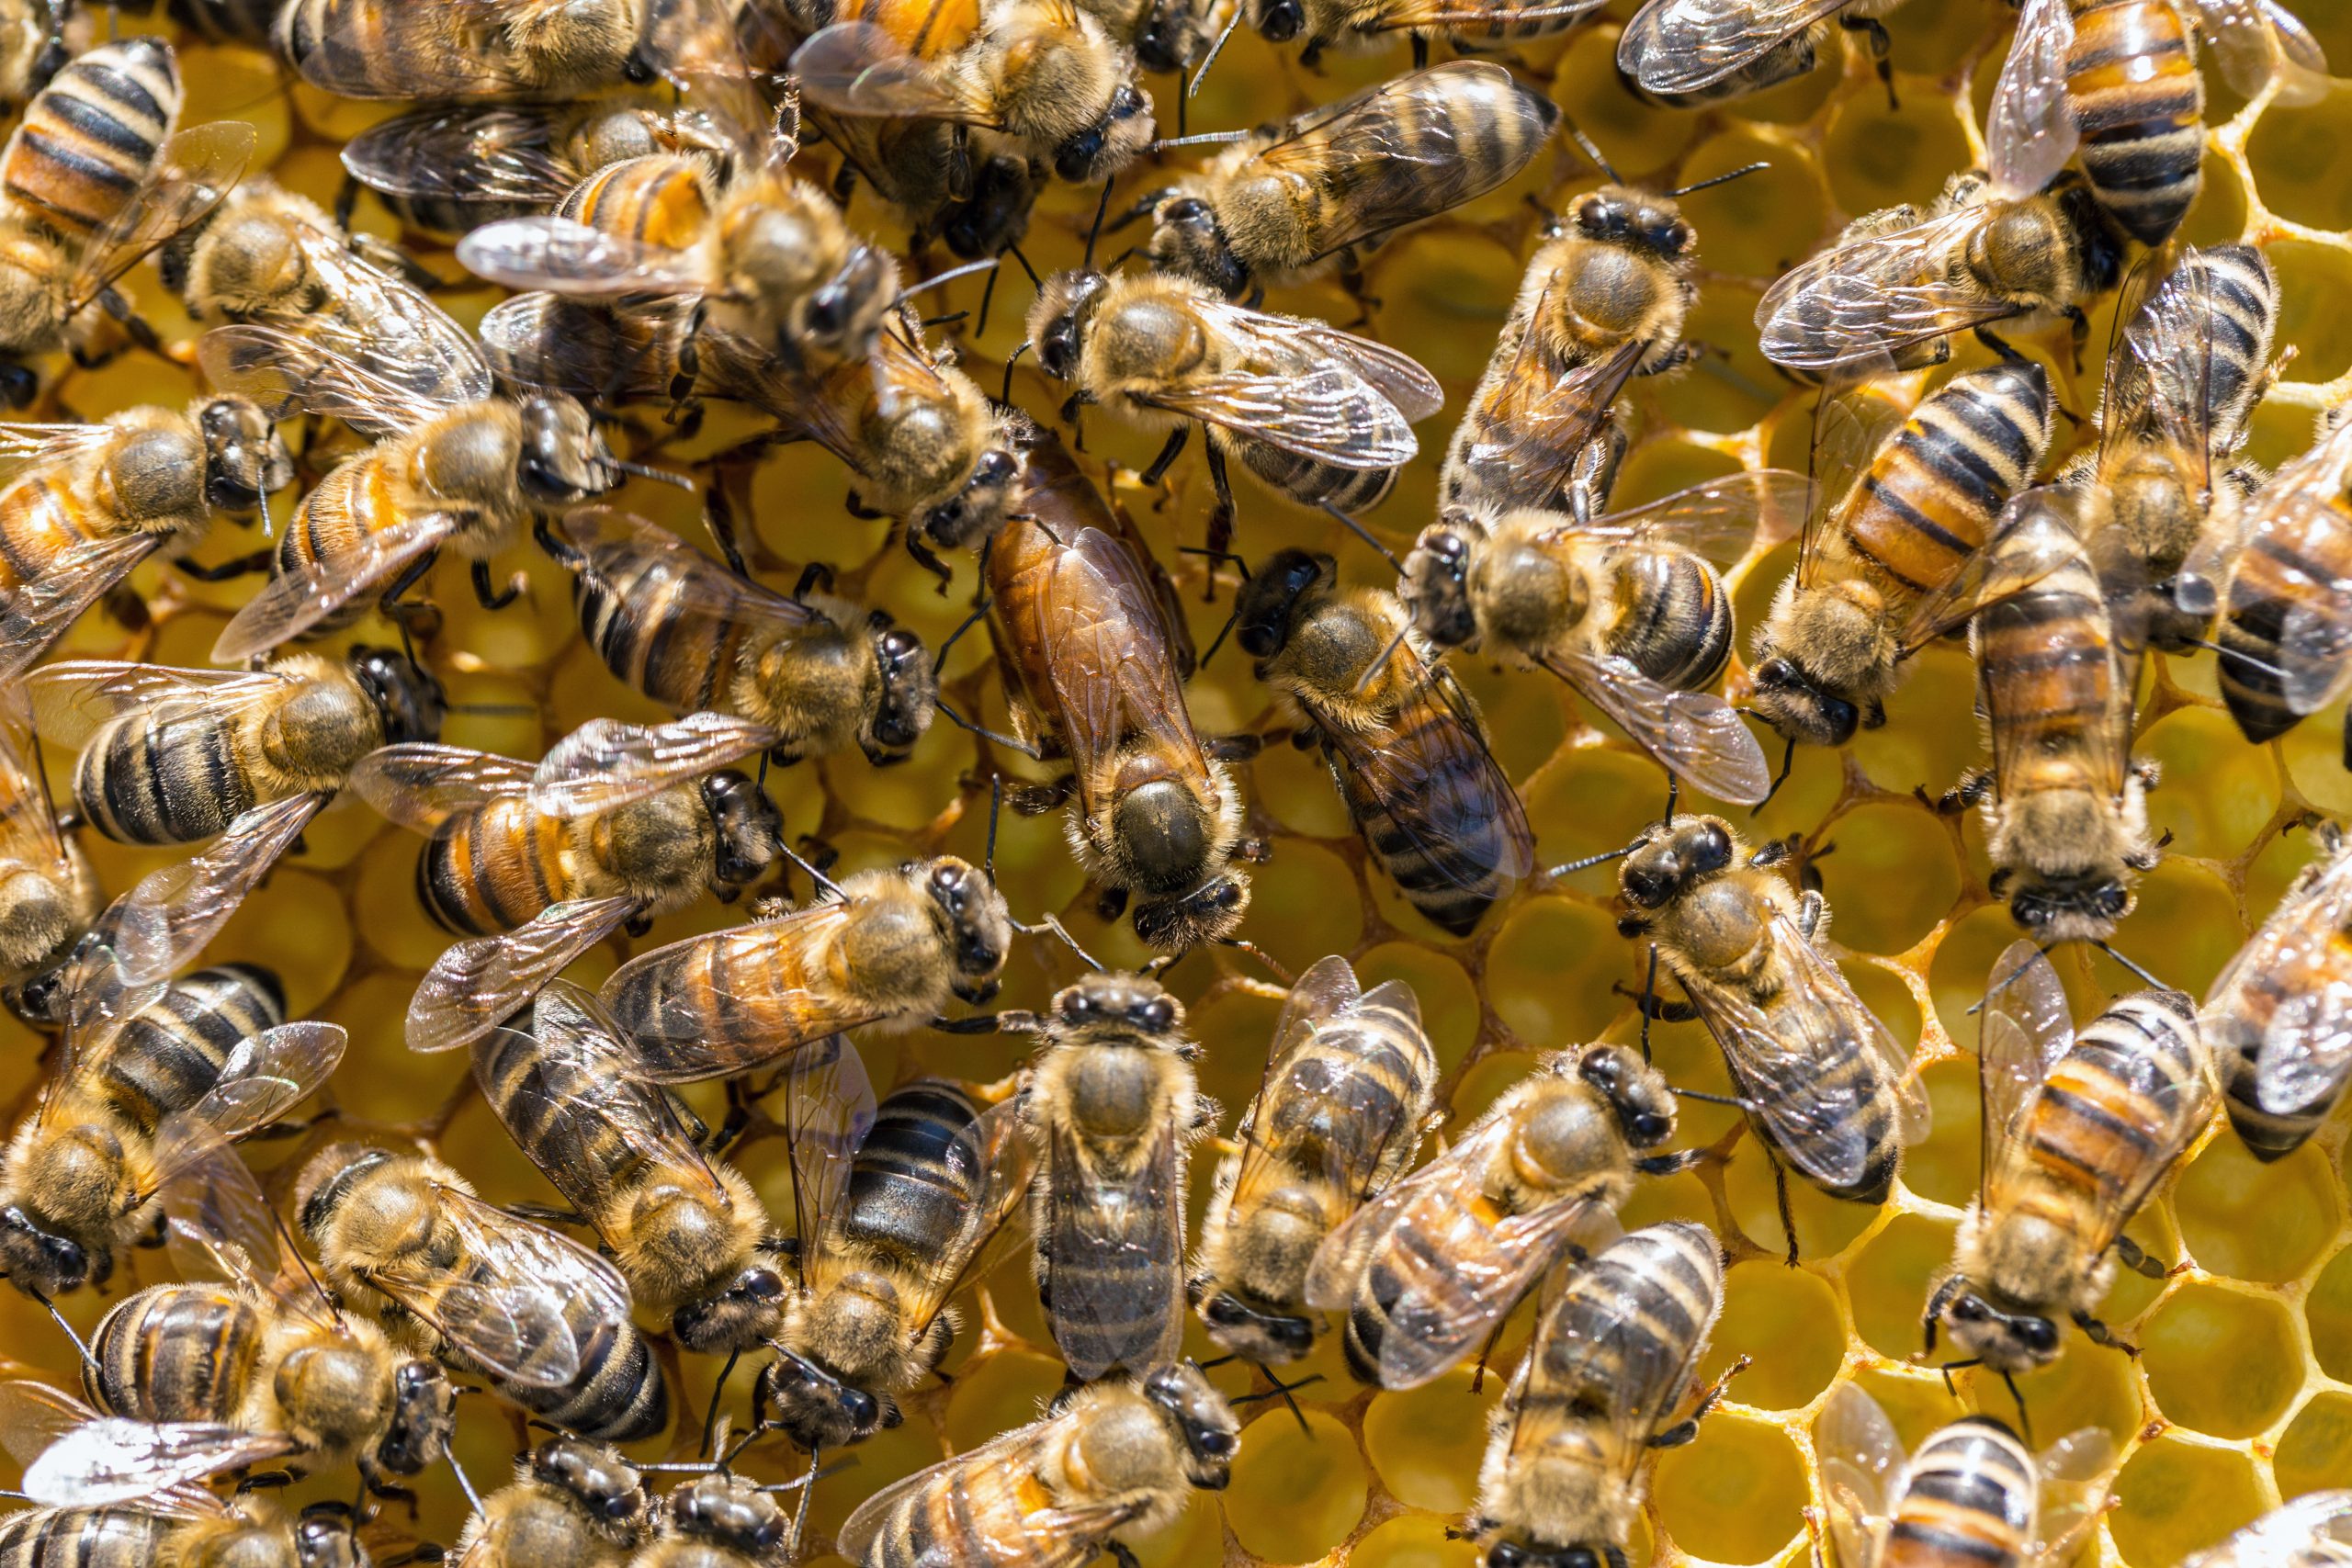 Queen Honeybees Not Determined by One Protein